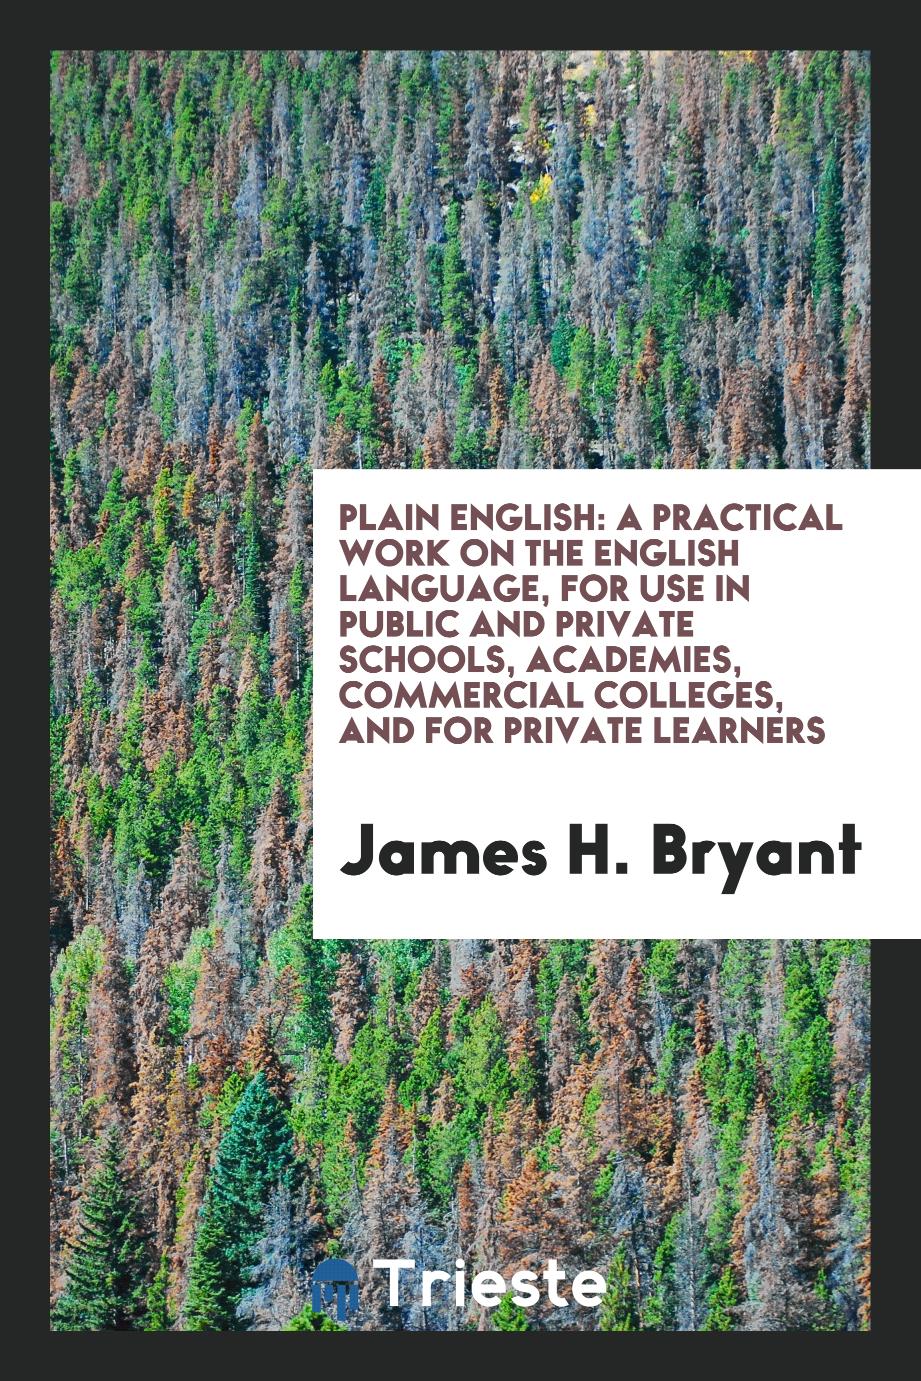 Plain English: a practical work on the English language, for use in public and private schools, academies, commercial colleges, and for private learners